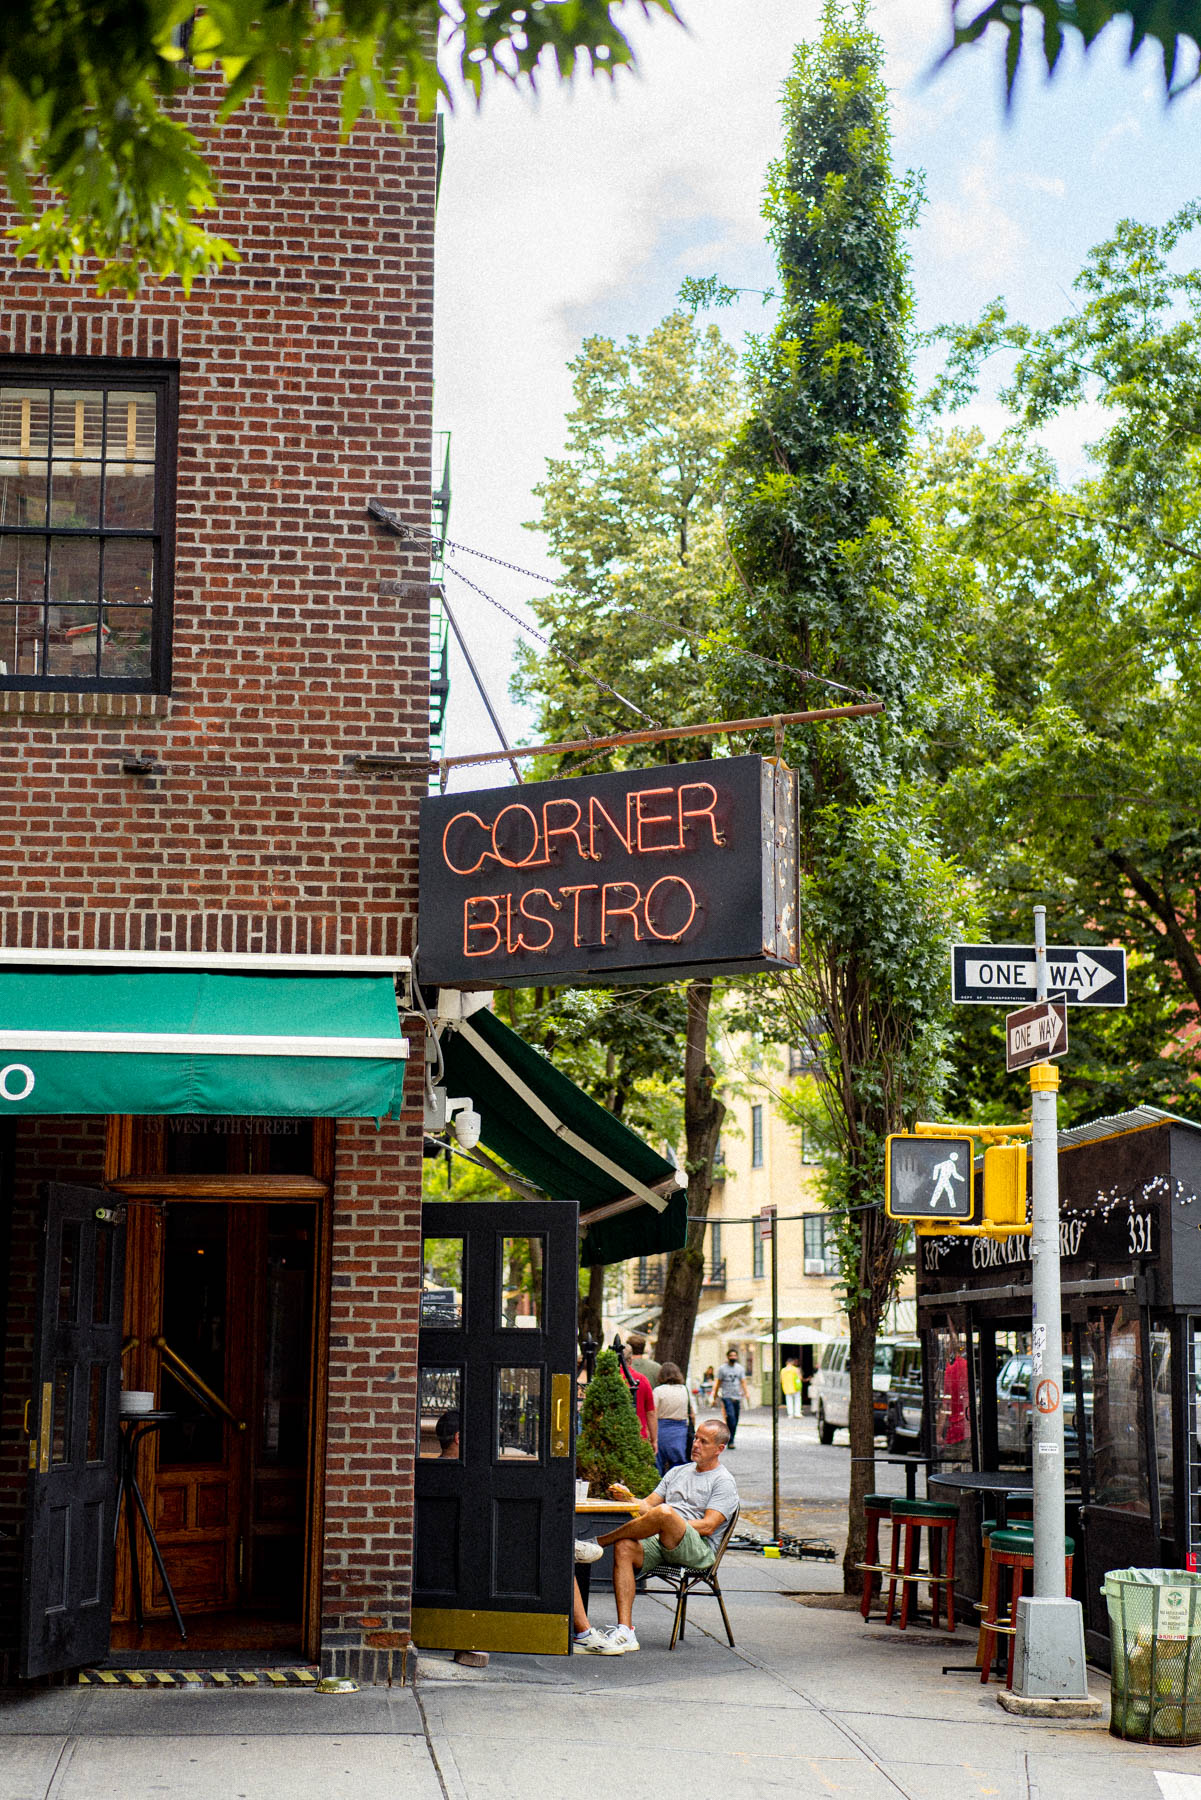 Best things to do at night NYC
Corner Bistro west village